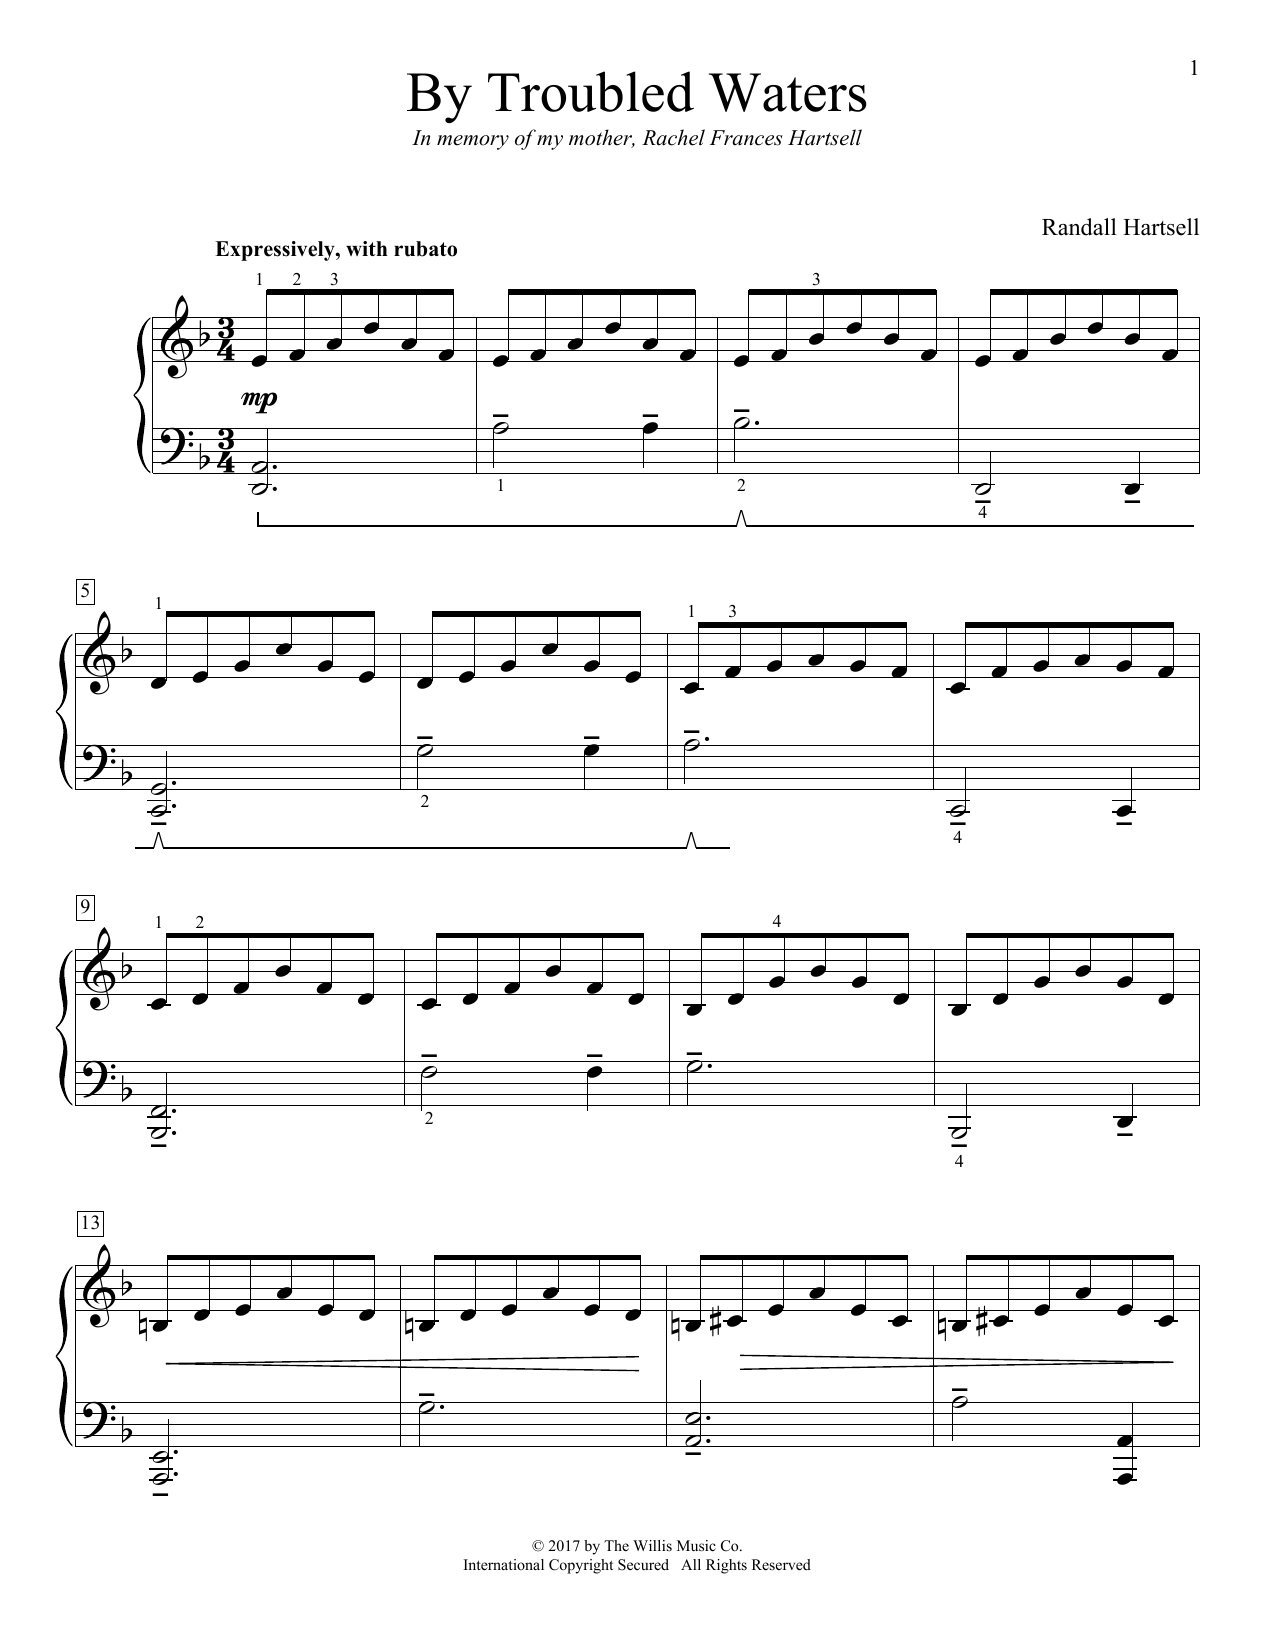 Download Randall Hartsell By Troubled Waters Sheet Music